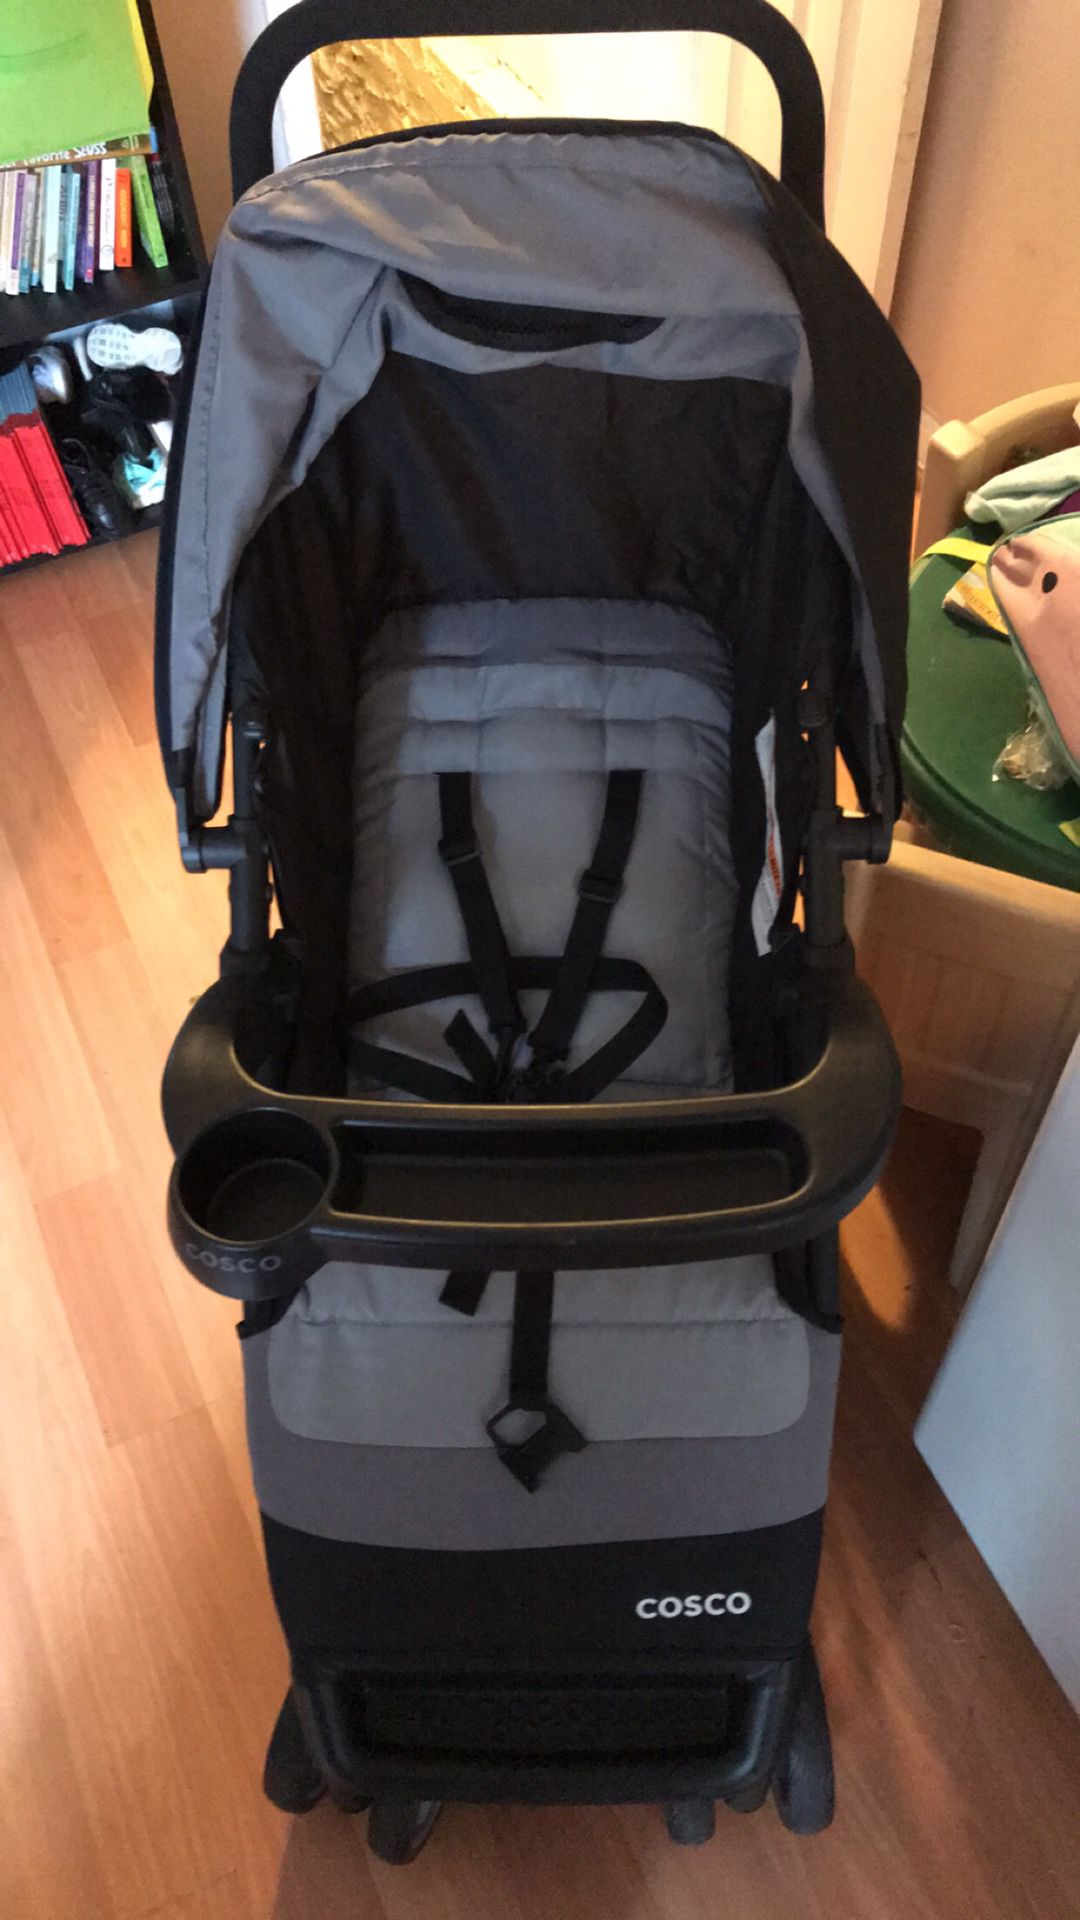 Cosco stroller and carseat